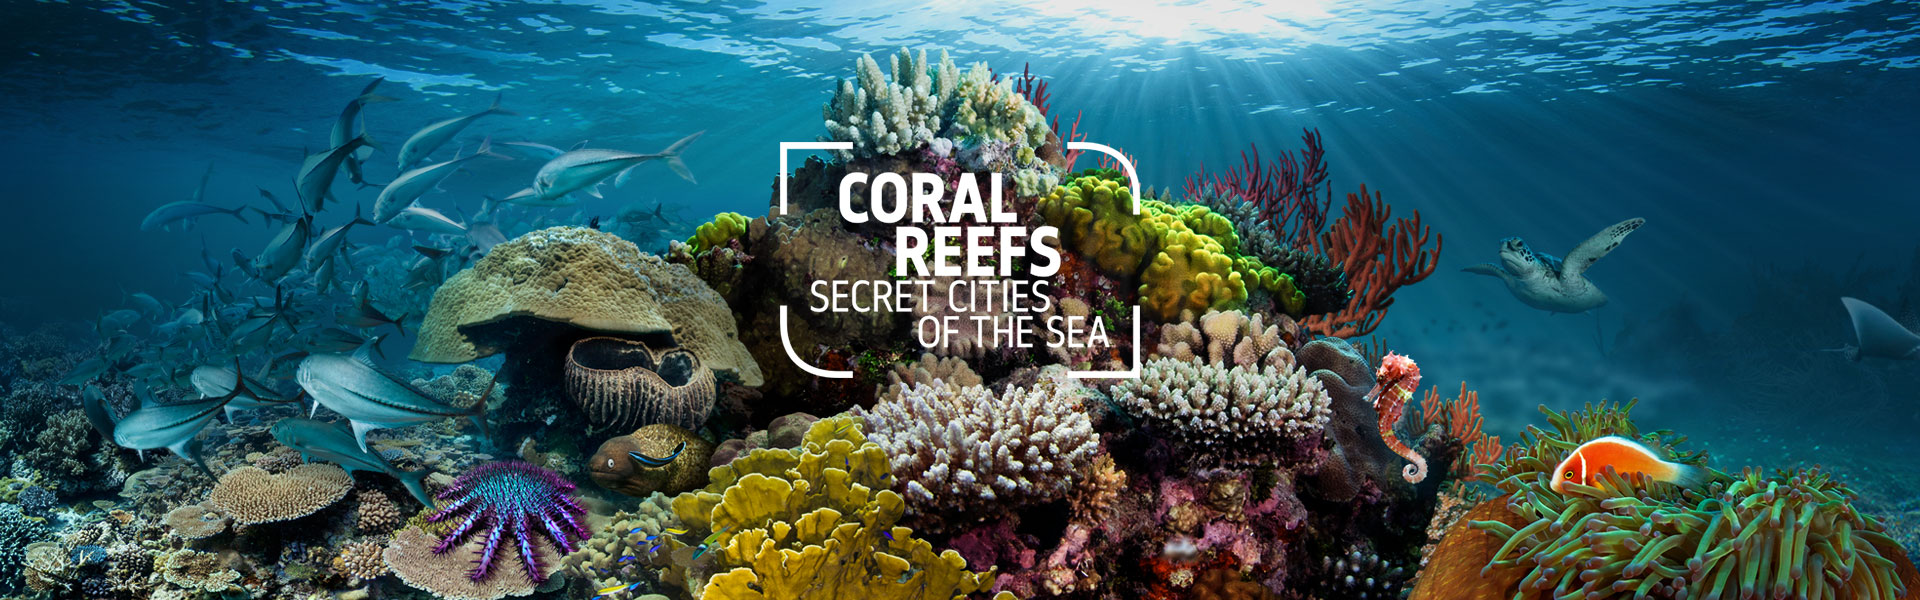 Natural History Museum Reveals Secret Cities Of The Sea